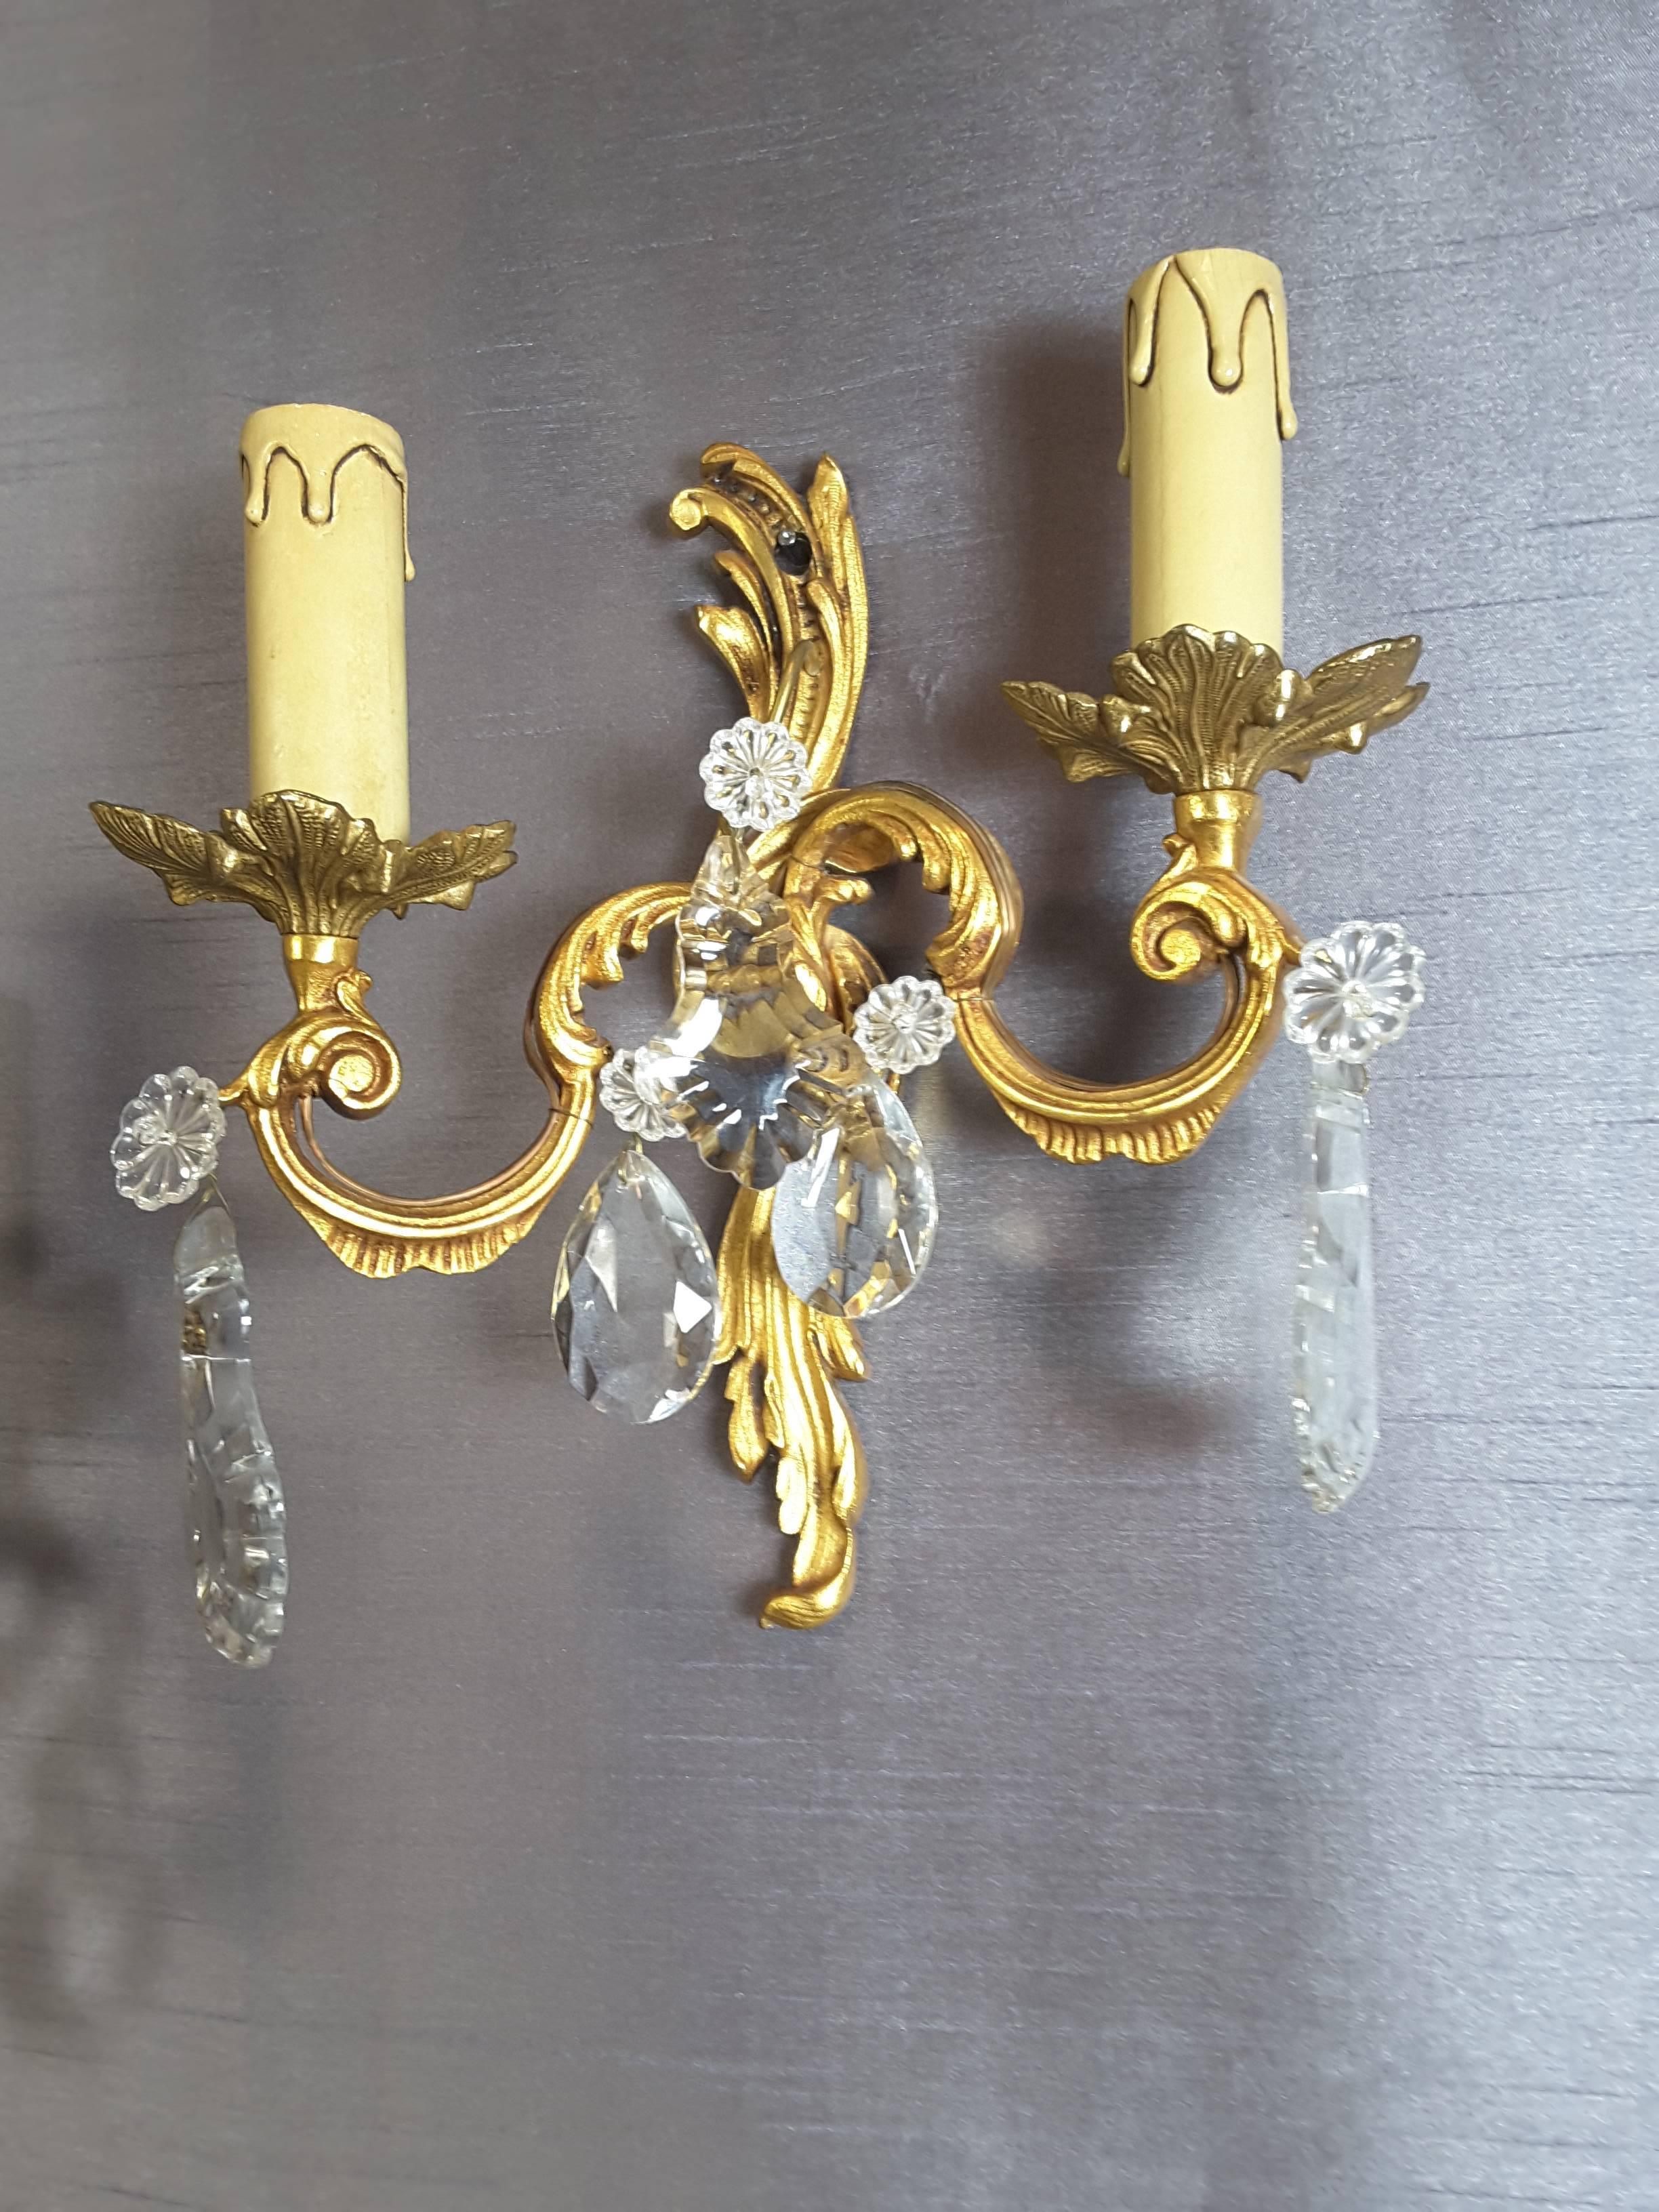 Unknown Pair of Brass/Gilt Wall Sconces with Floral Crystals